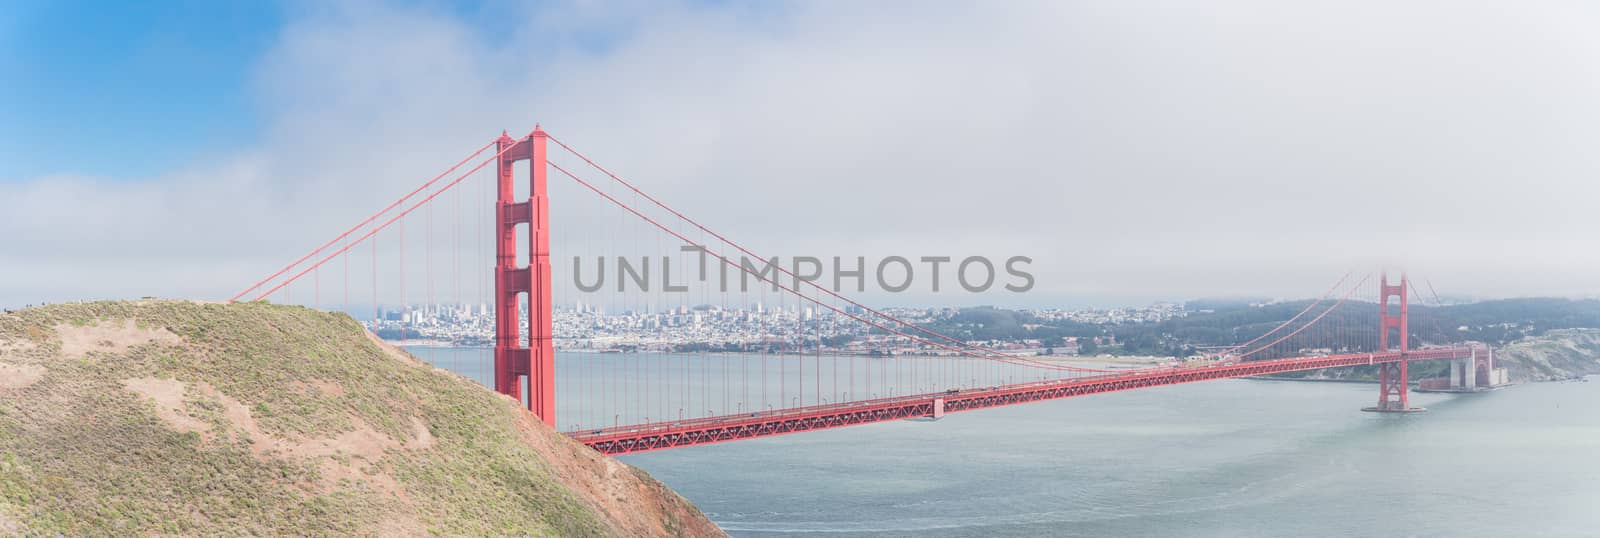 Battery Kirby ridge toward Batter Wagner view of Golden Gate Bridge. Panorama of iconic San Francisco travel destination with downtown in background, summer foggy day.